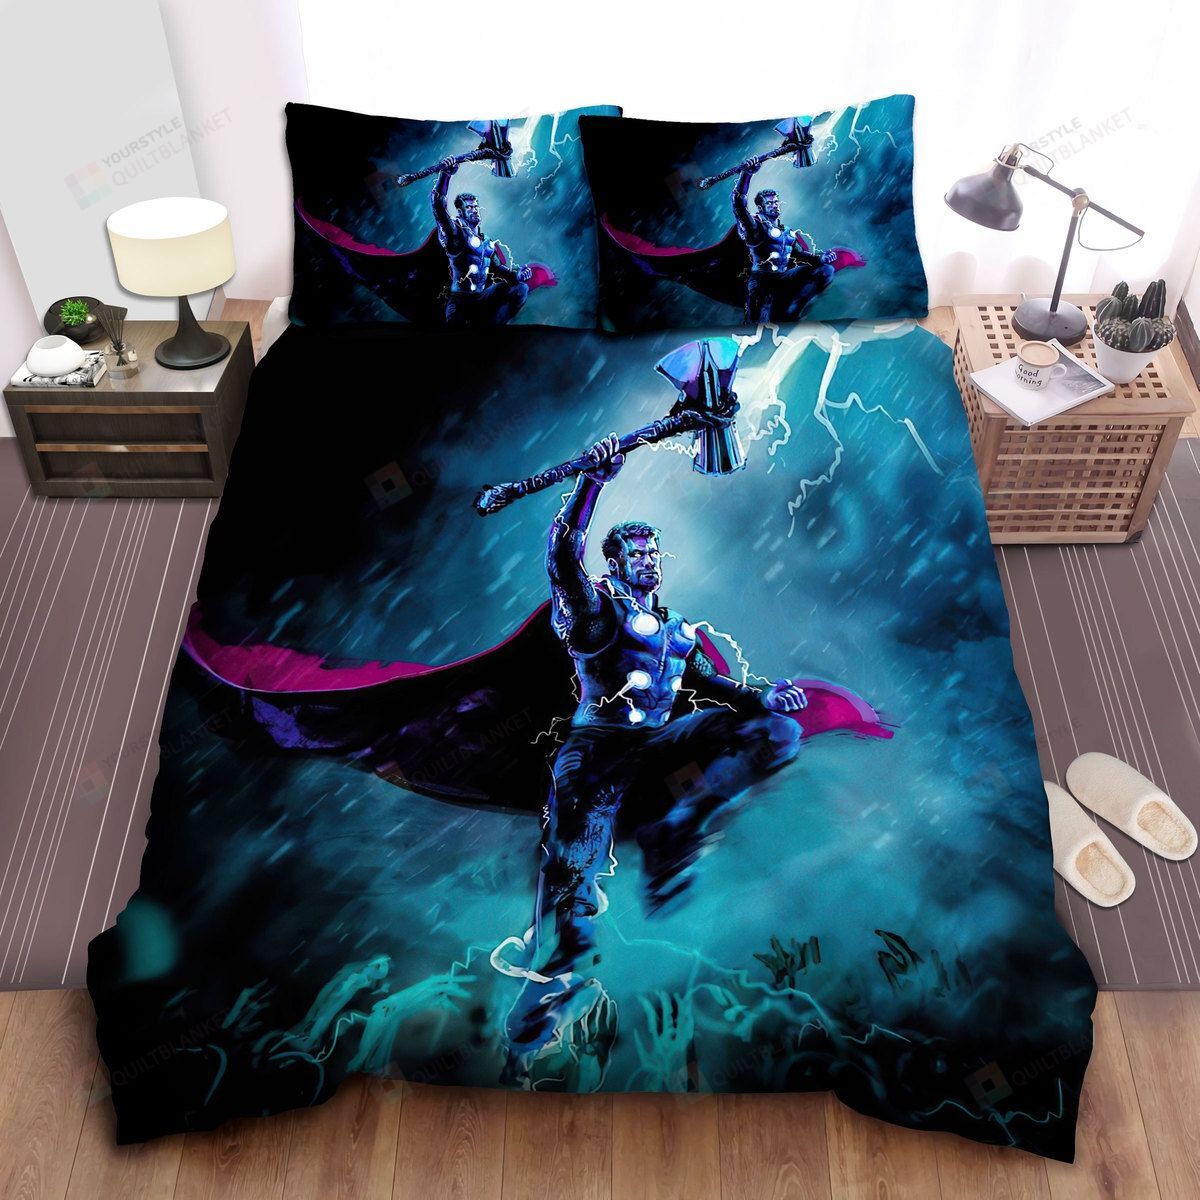 Marvel Thor Flying With Stormbreak In Digital Painting Bed Sheets Spread Comforter Duvet Cover Bedding Sets